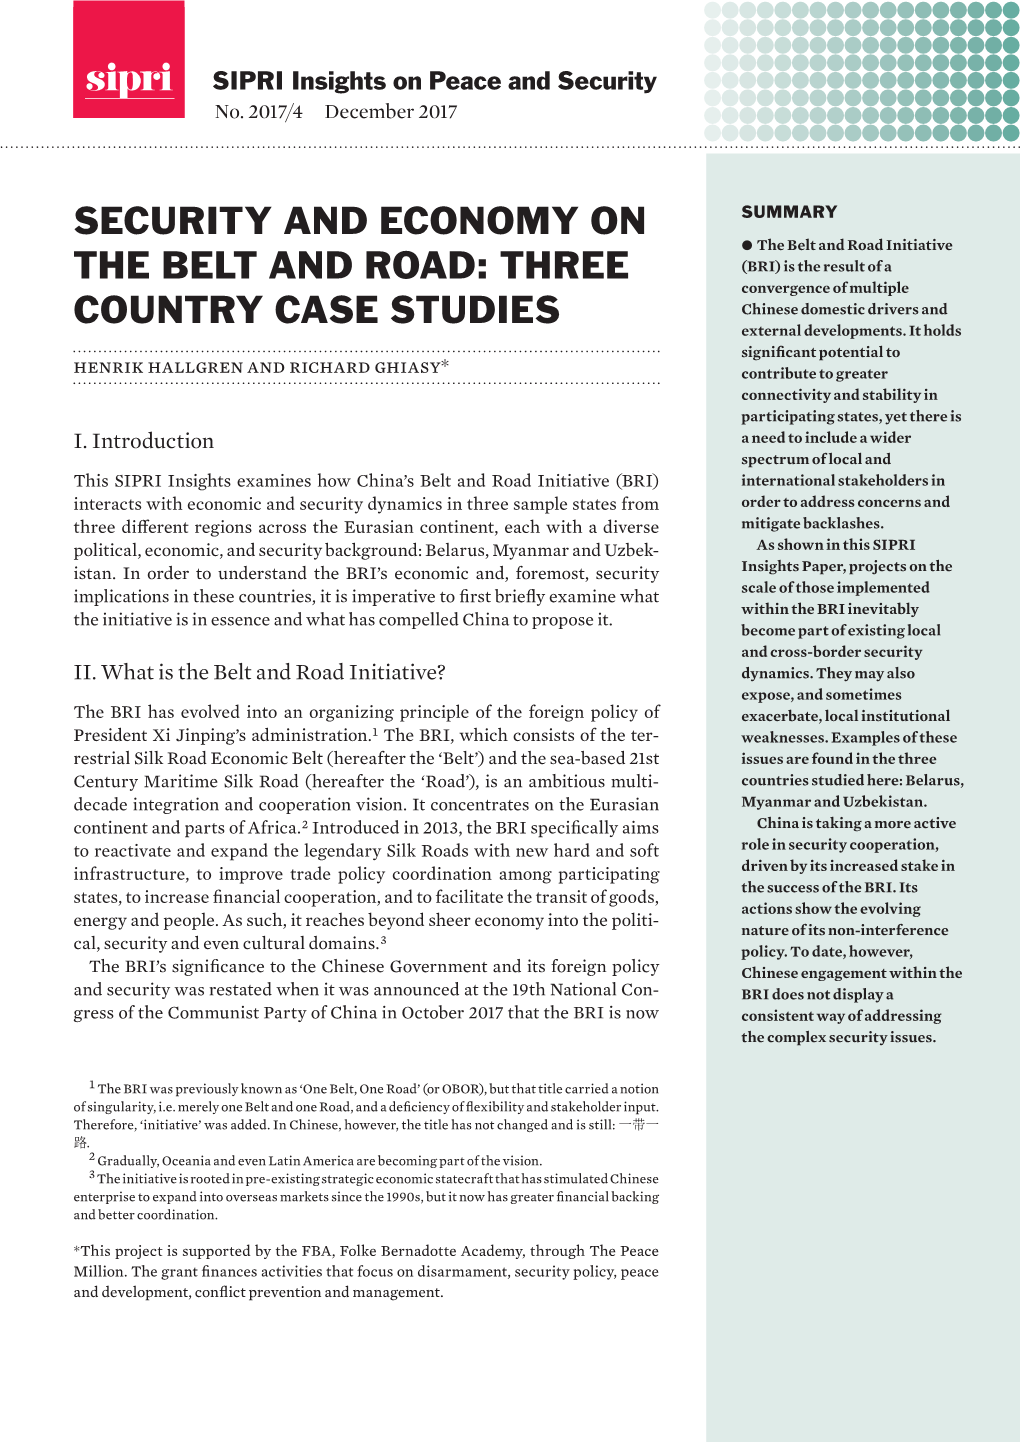 Security and Economy on the Belt and Road: Three Country